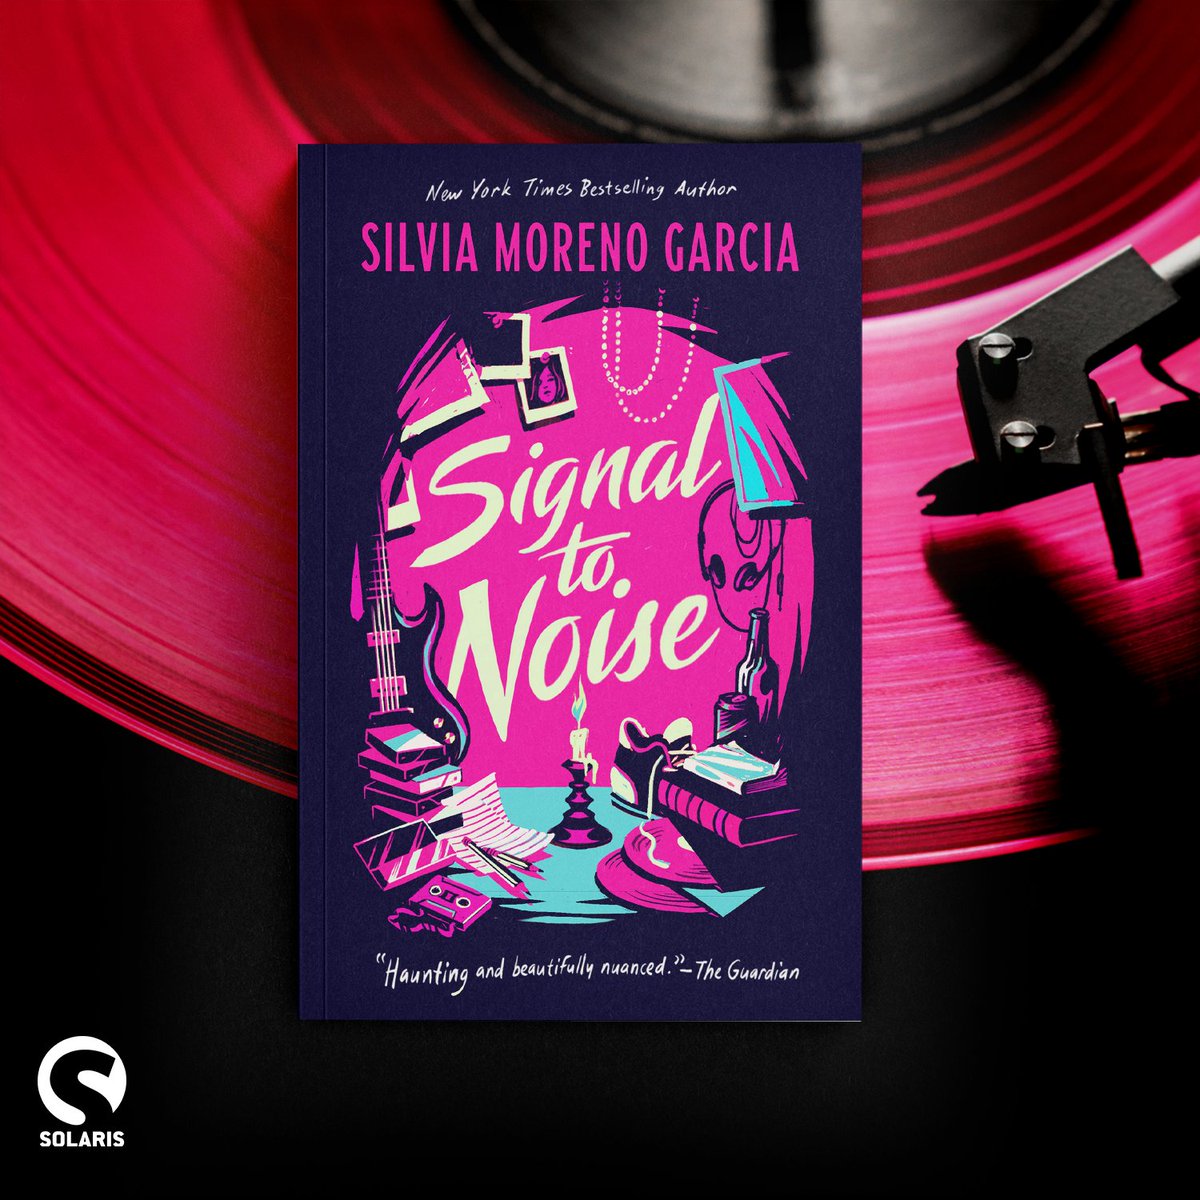 We're feeling in the pink! Meche returns for her estranged father’s funeral, reviving memories from her childhood she thought she buried a long time ago. What really happened back then? Is there any magic left? Grab @silviamg's SIGNAL TO NOISE now 👇 geni.us/Dk7qbh